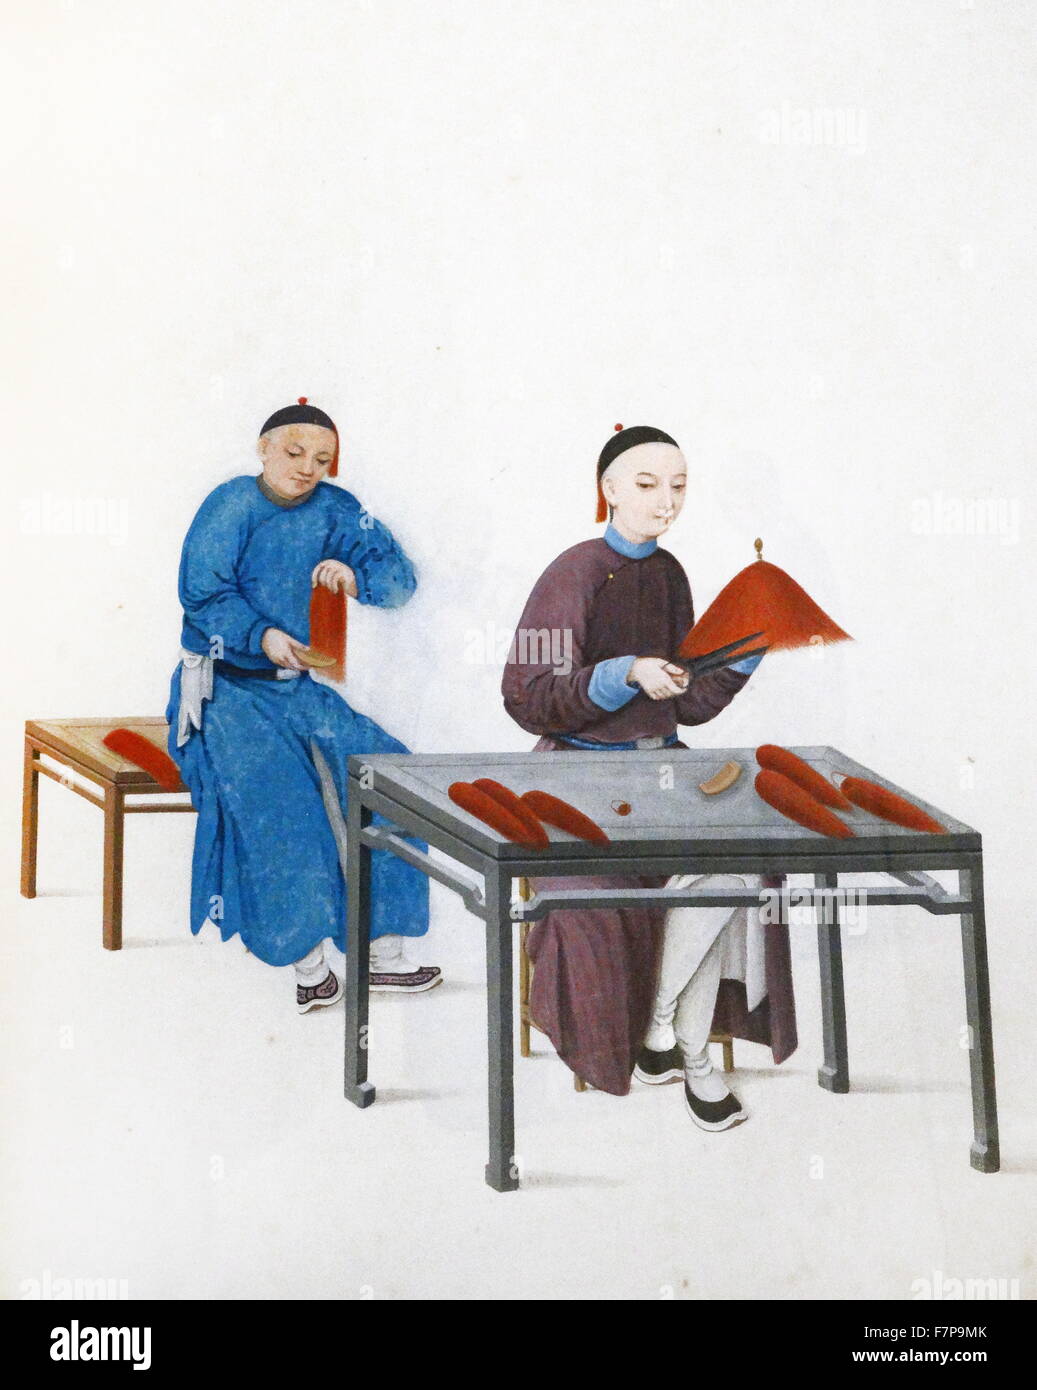 Colour illustration depicting Chinese men making tassels for hats. Throughout the Qing dynasty (1644-1911) men wore caps or hats with red silk tassels. Dated 1850 Stock Photo